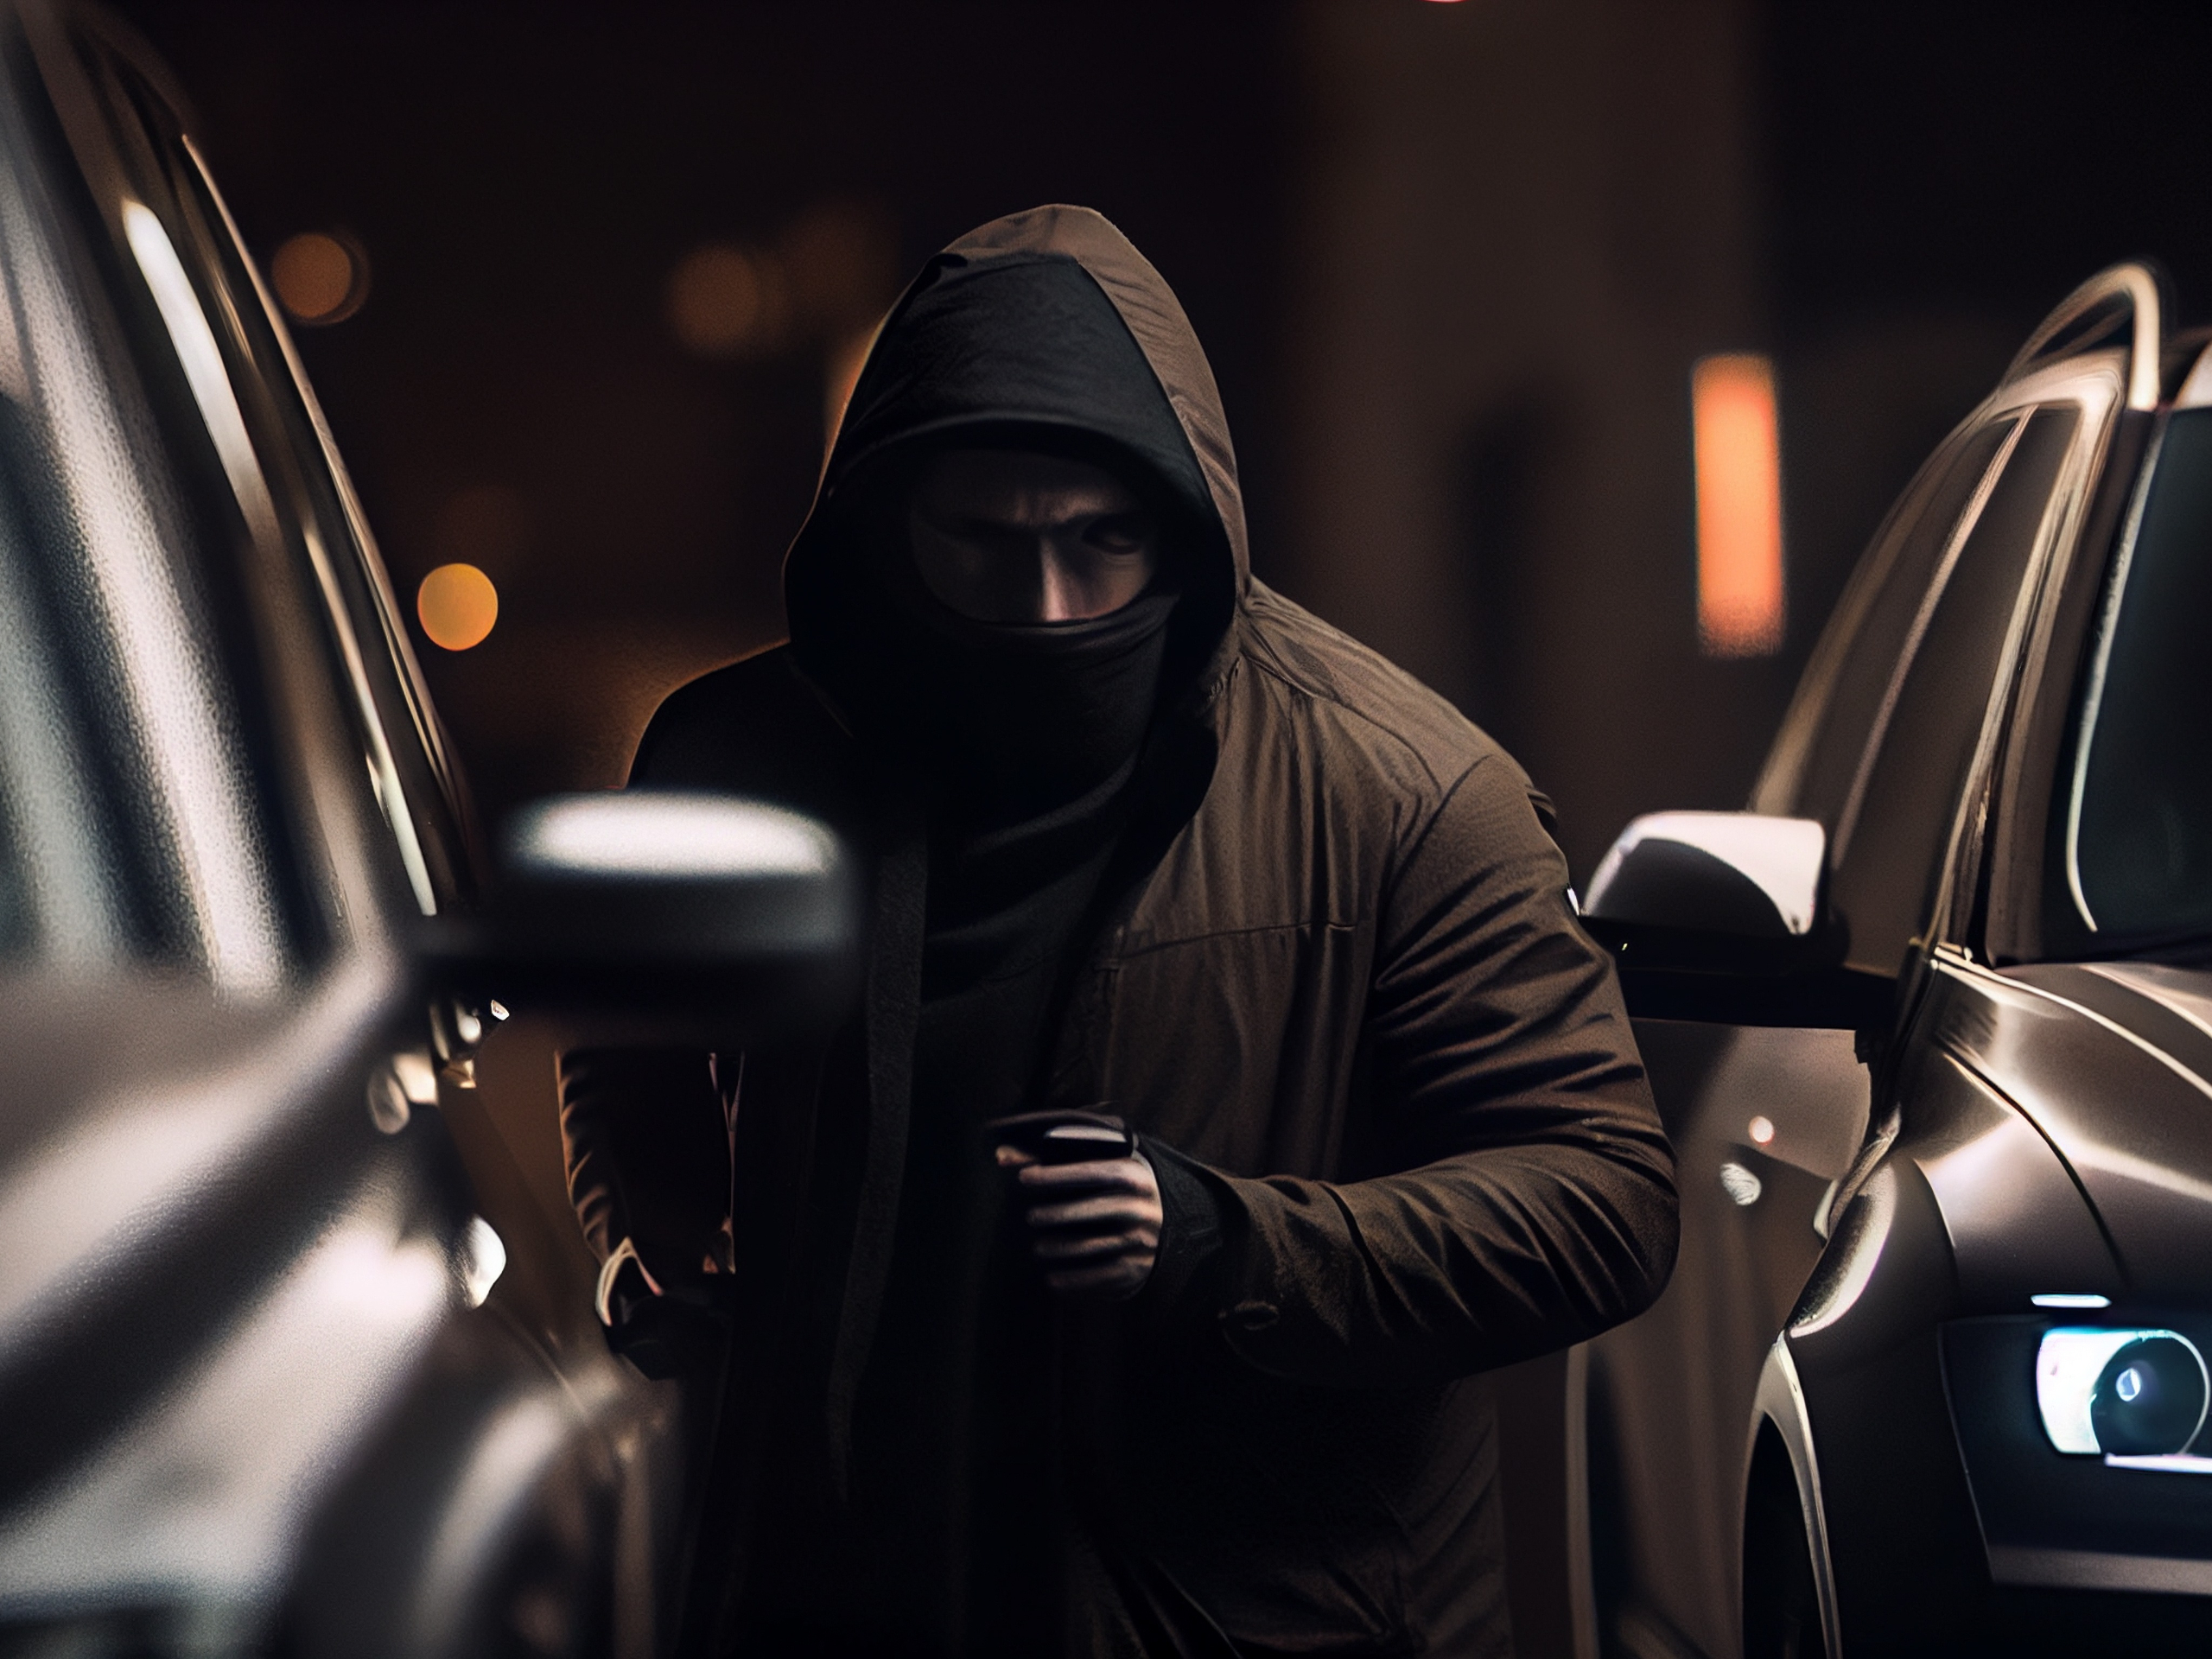 Motor theft - What can you do to protect yourself?